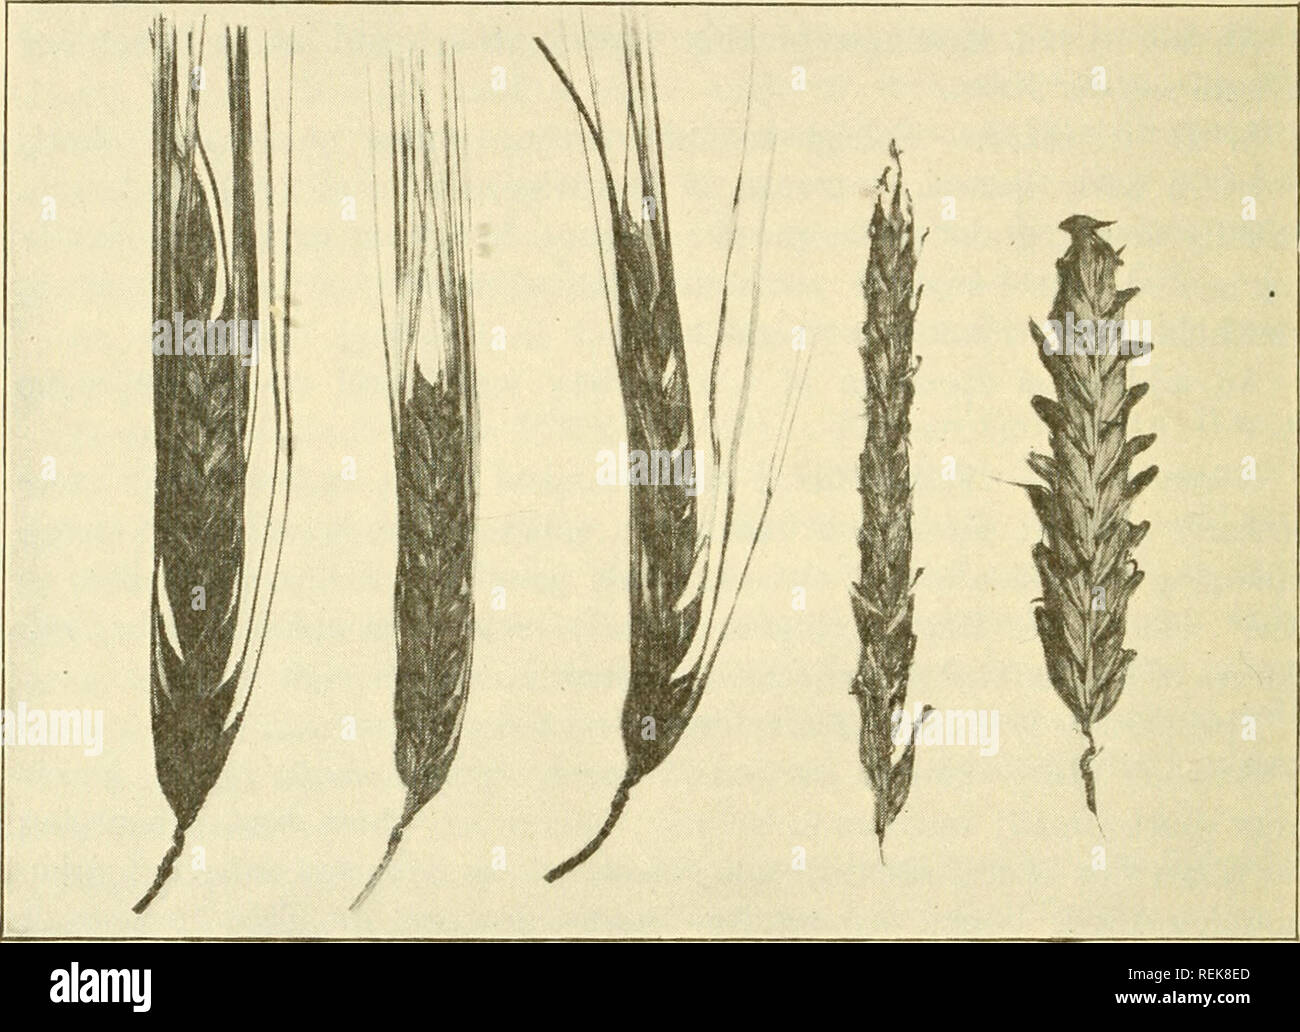 . A classification of the cultivated varieties of barley ... Barley. 444 Roy Glen Wiggans and from H. distichon by a great reduction in the structures of the side spikelets. The side spikelets of H. deficiens (fig. 72) not only are sterile, but also are reduced in all the floral parts to a much greater extent than in H. distichon. In some cases alj that remains in evidence of a side spikelet is one outer glume. Neither pistil nor stamers are ever present.. ABC D E Fig. 72. various types of hordeum deficiens A, Selection G21; B, Russian Courland; C, S. P. I. 41155; D, Selection 626; E, Selectio Stock Photo